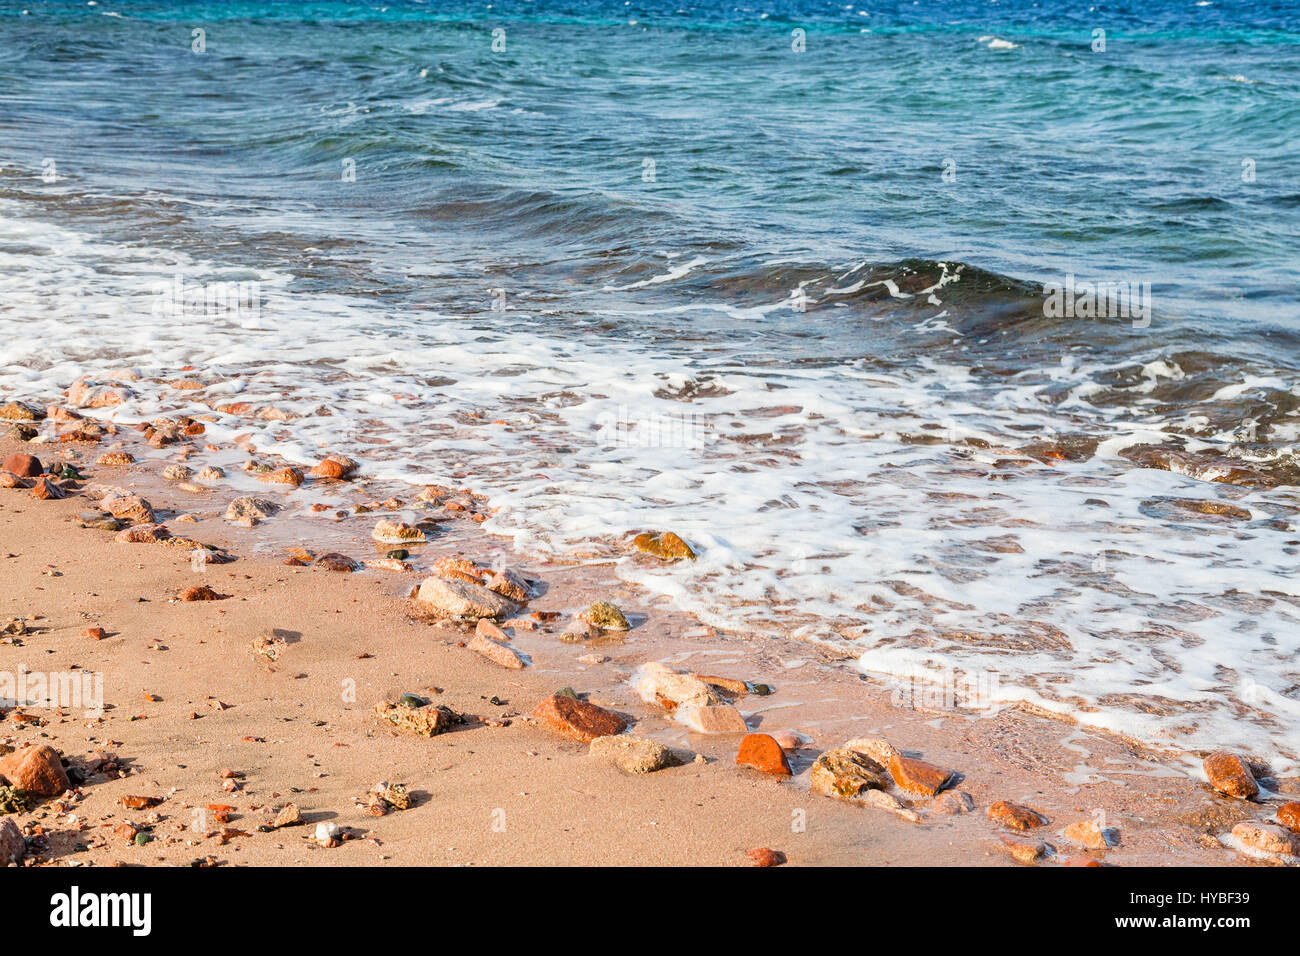 Travel to Middle East country Kingdom of Jordan - beach of Gulf of Aqaba on Red Sea in winter morning Stock Photo